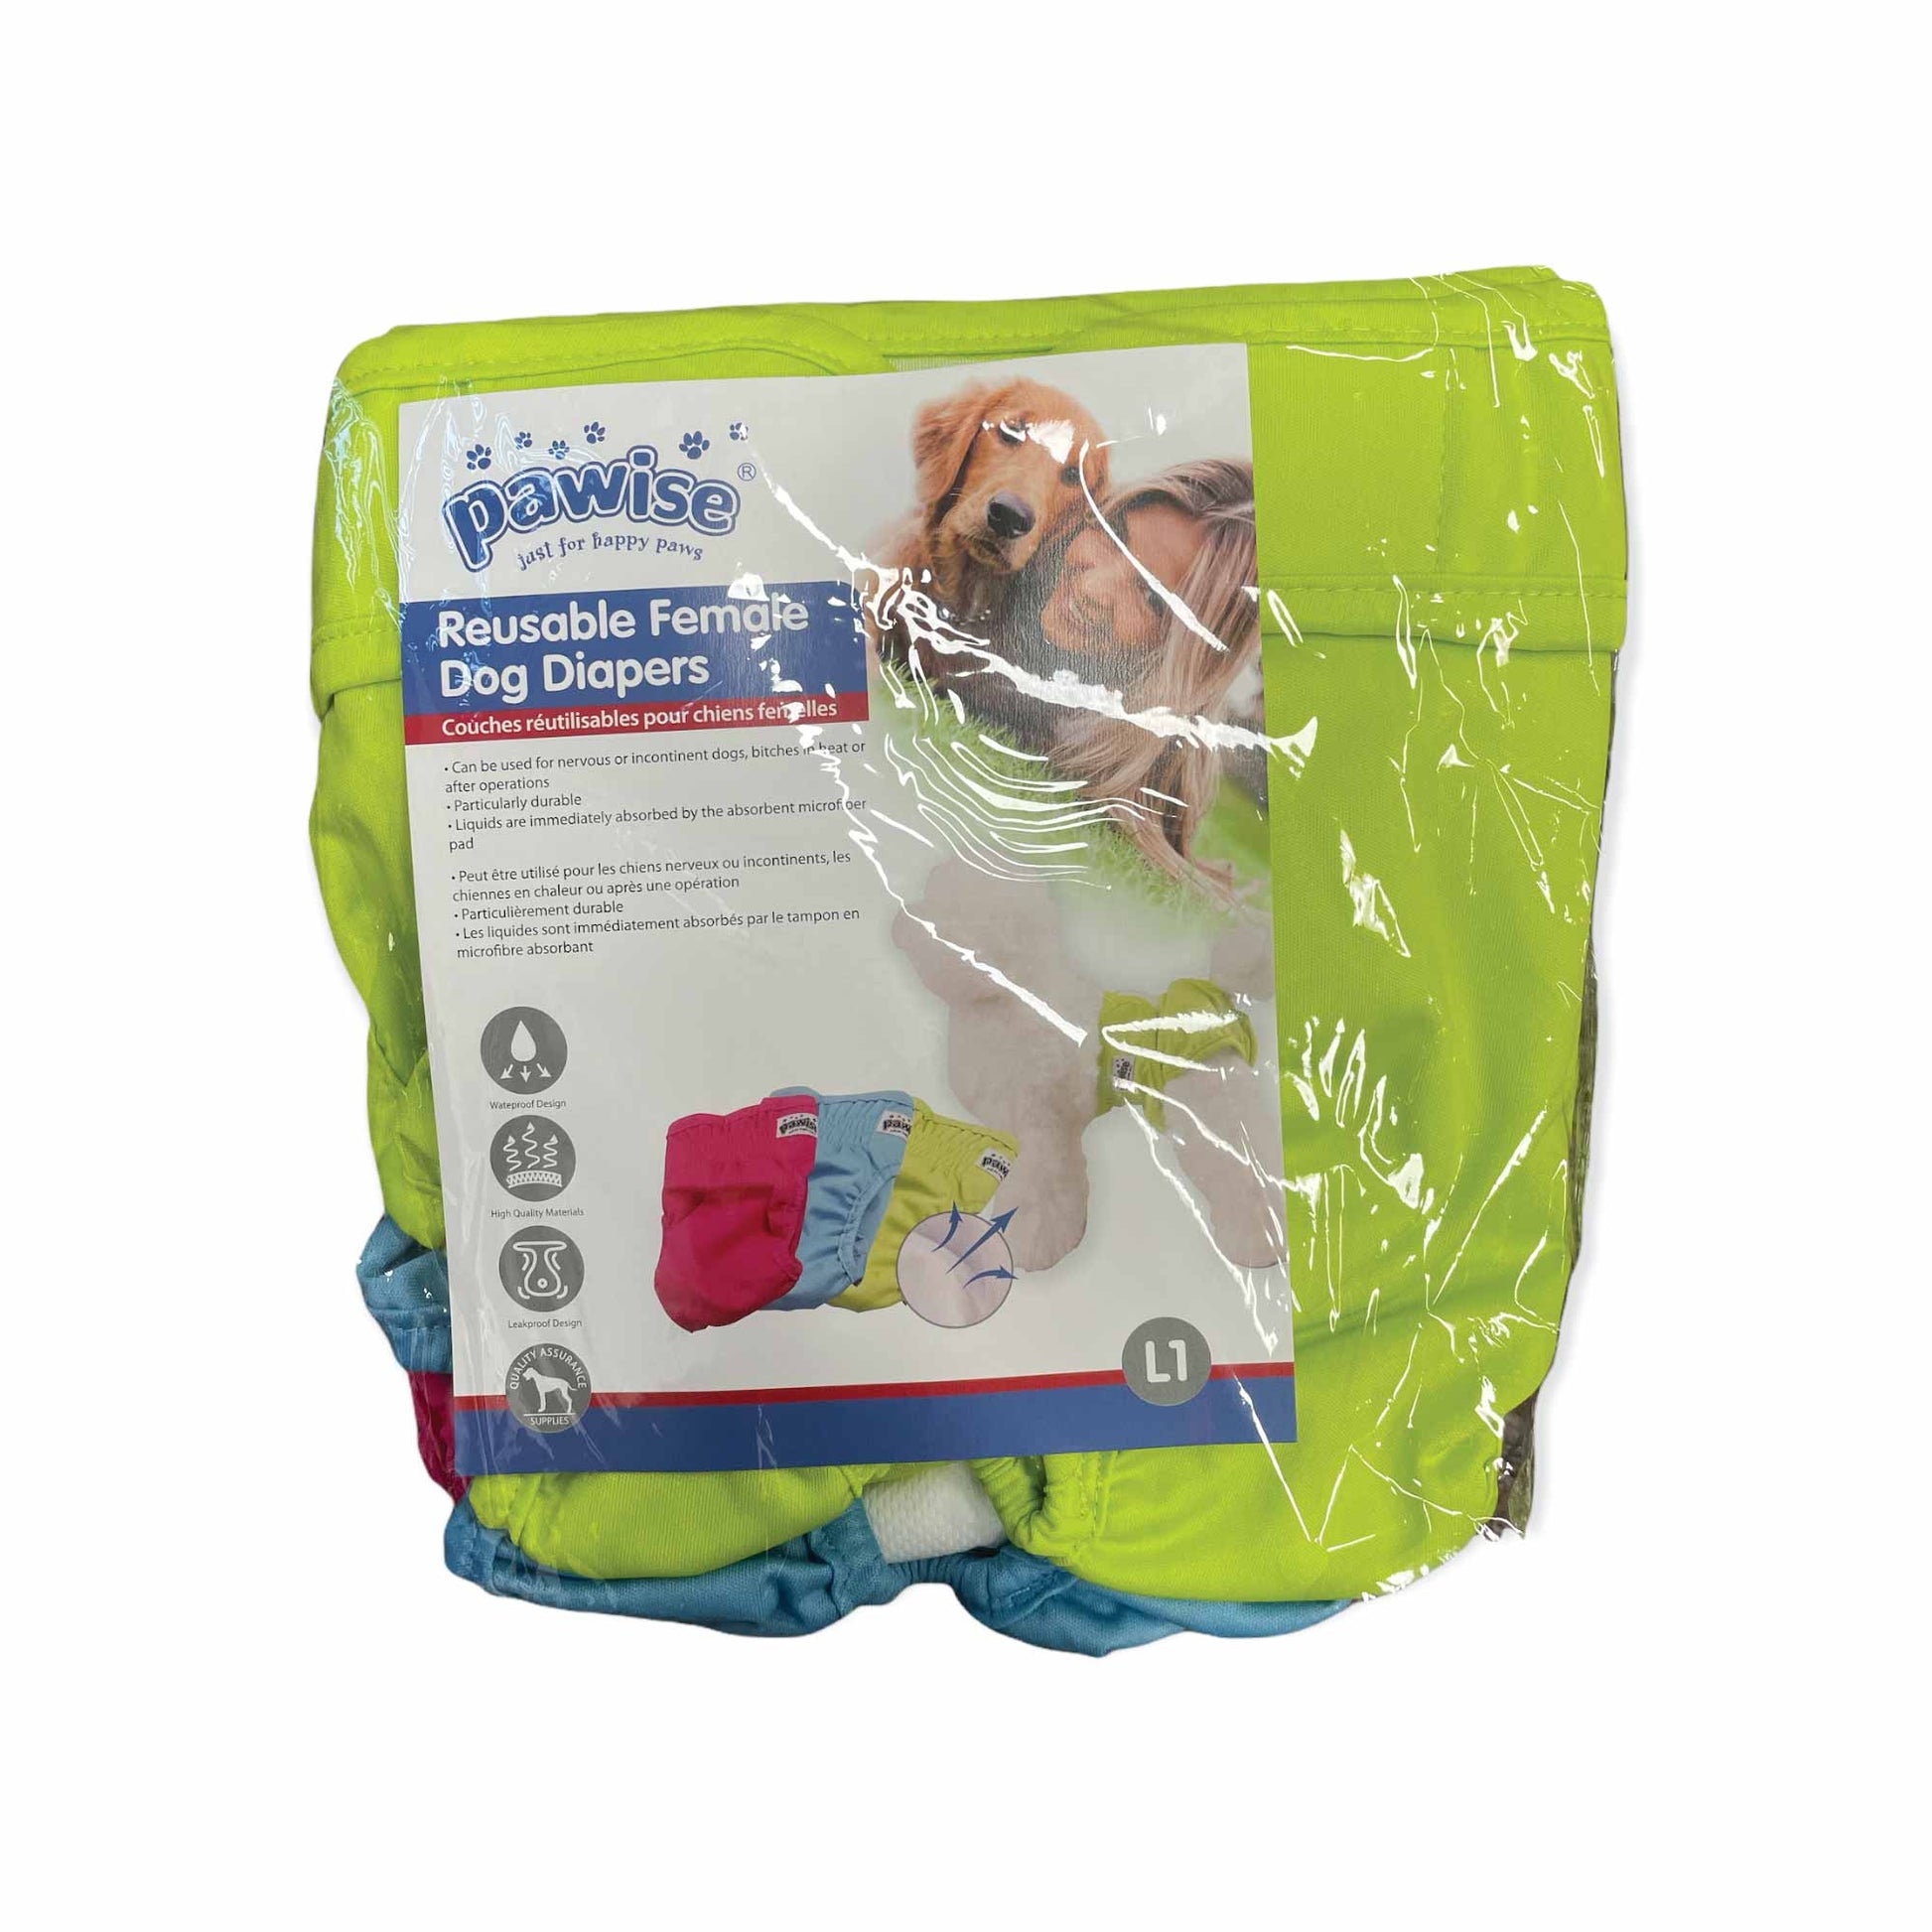 3 Pck Reusable Female Dog Diapers Puppy Nappy Eco Washable Period Incontinence Heat-12